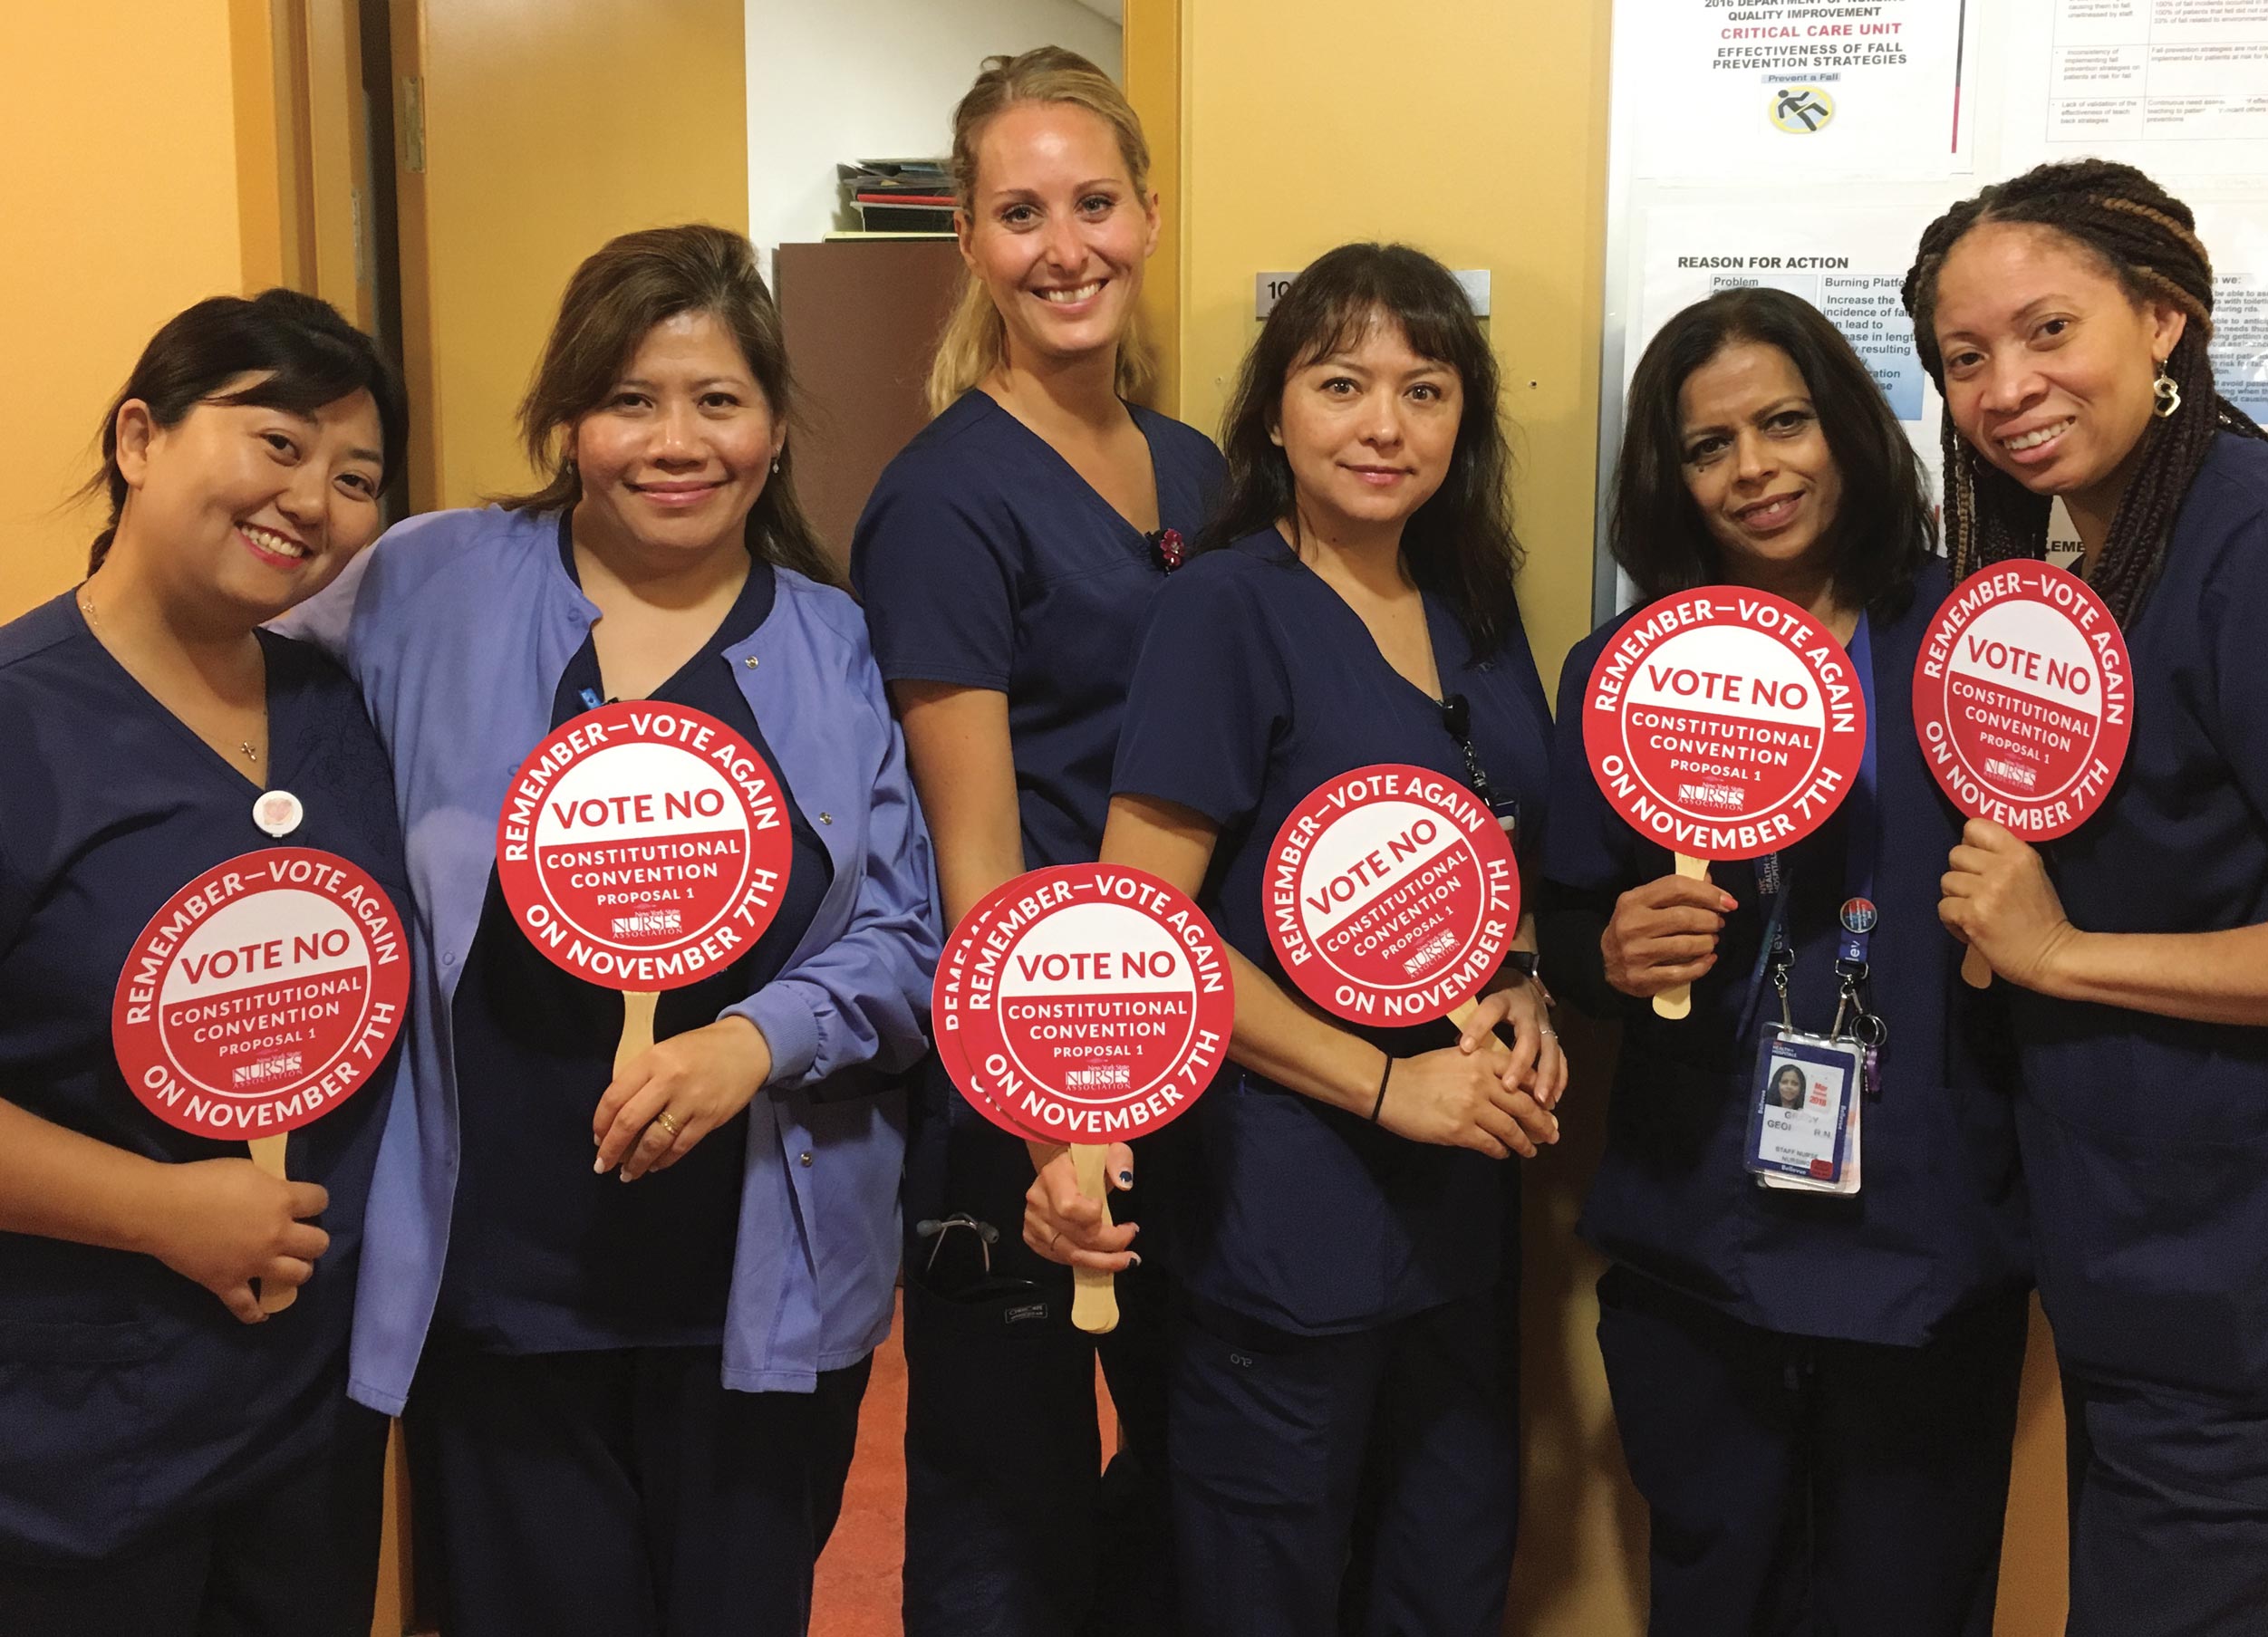 There is no turning back. Nurses at Bellevue Hospital display signage that became ubiquitous in the winning campaign against the Con Con.